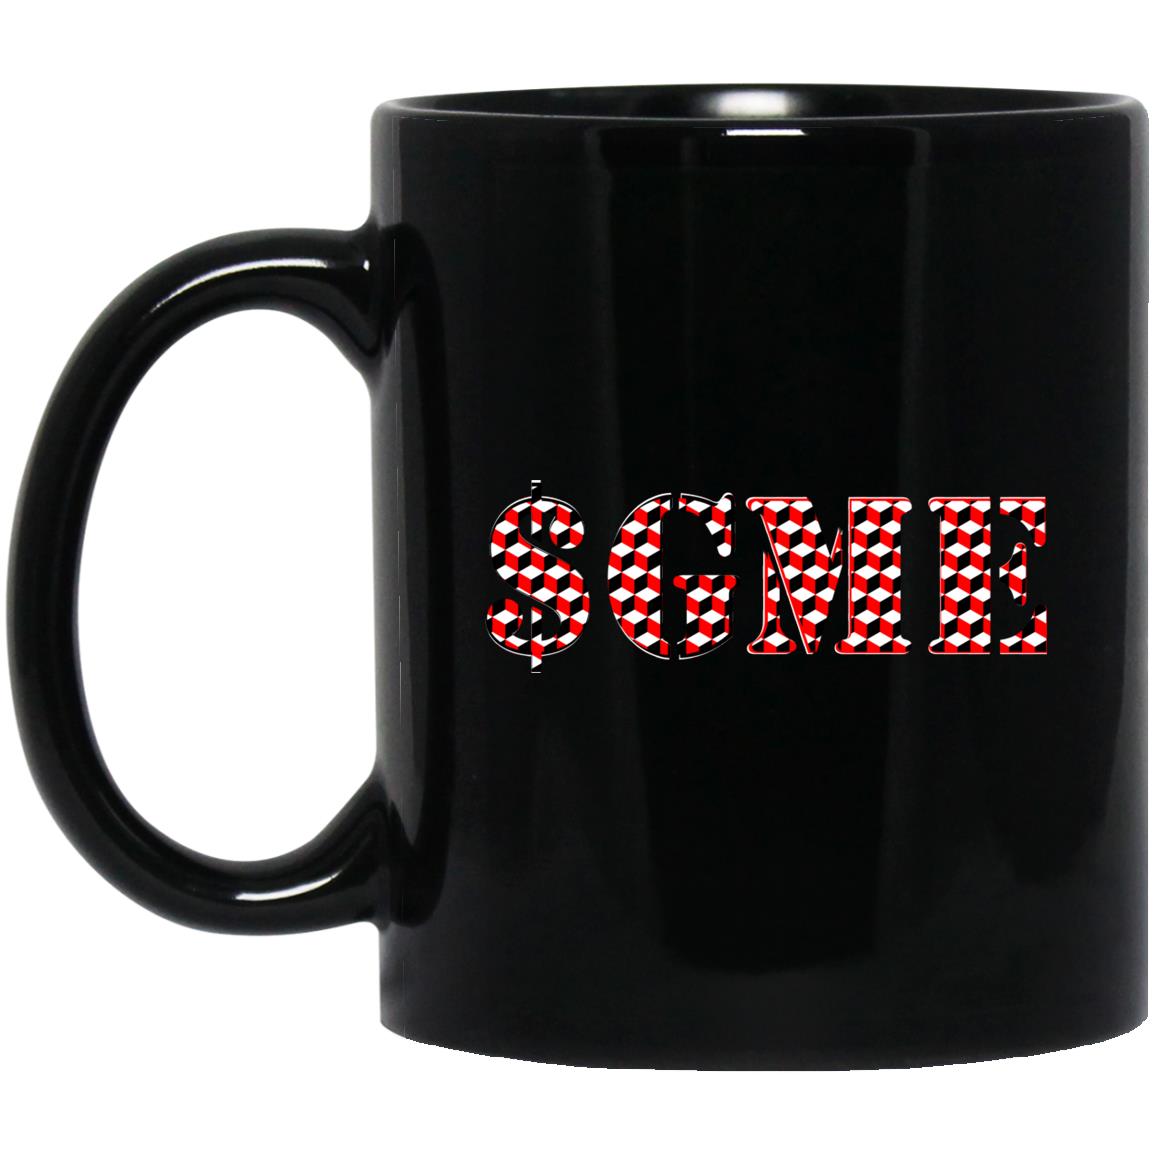 $GME - Cups Mugs Black, White & Color-Changing